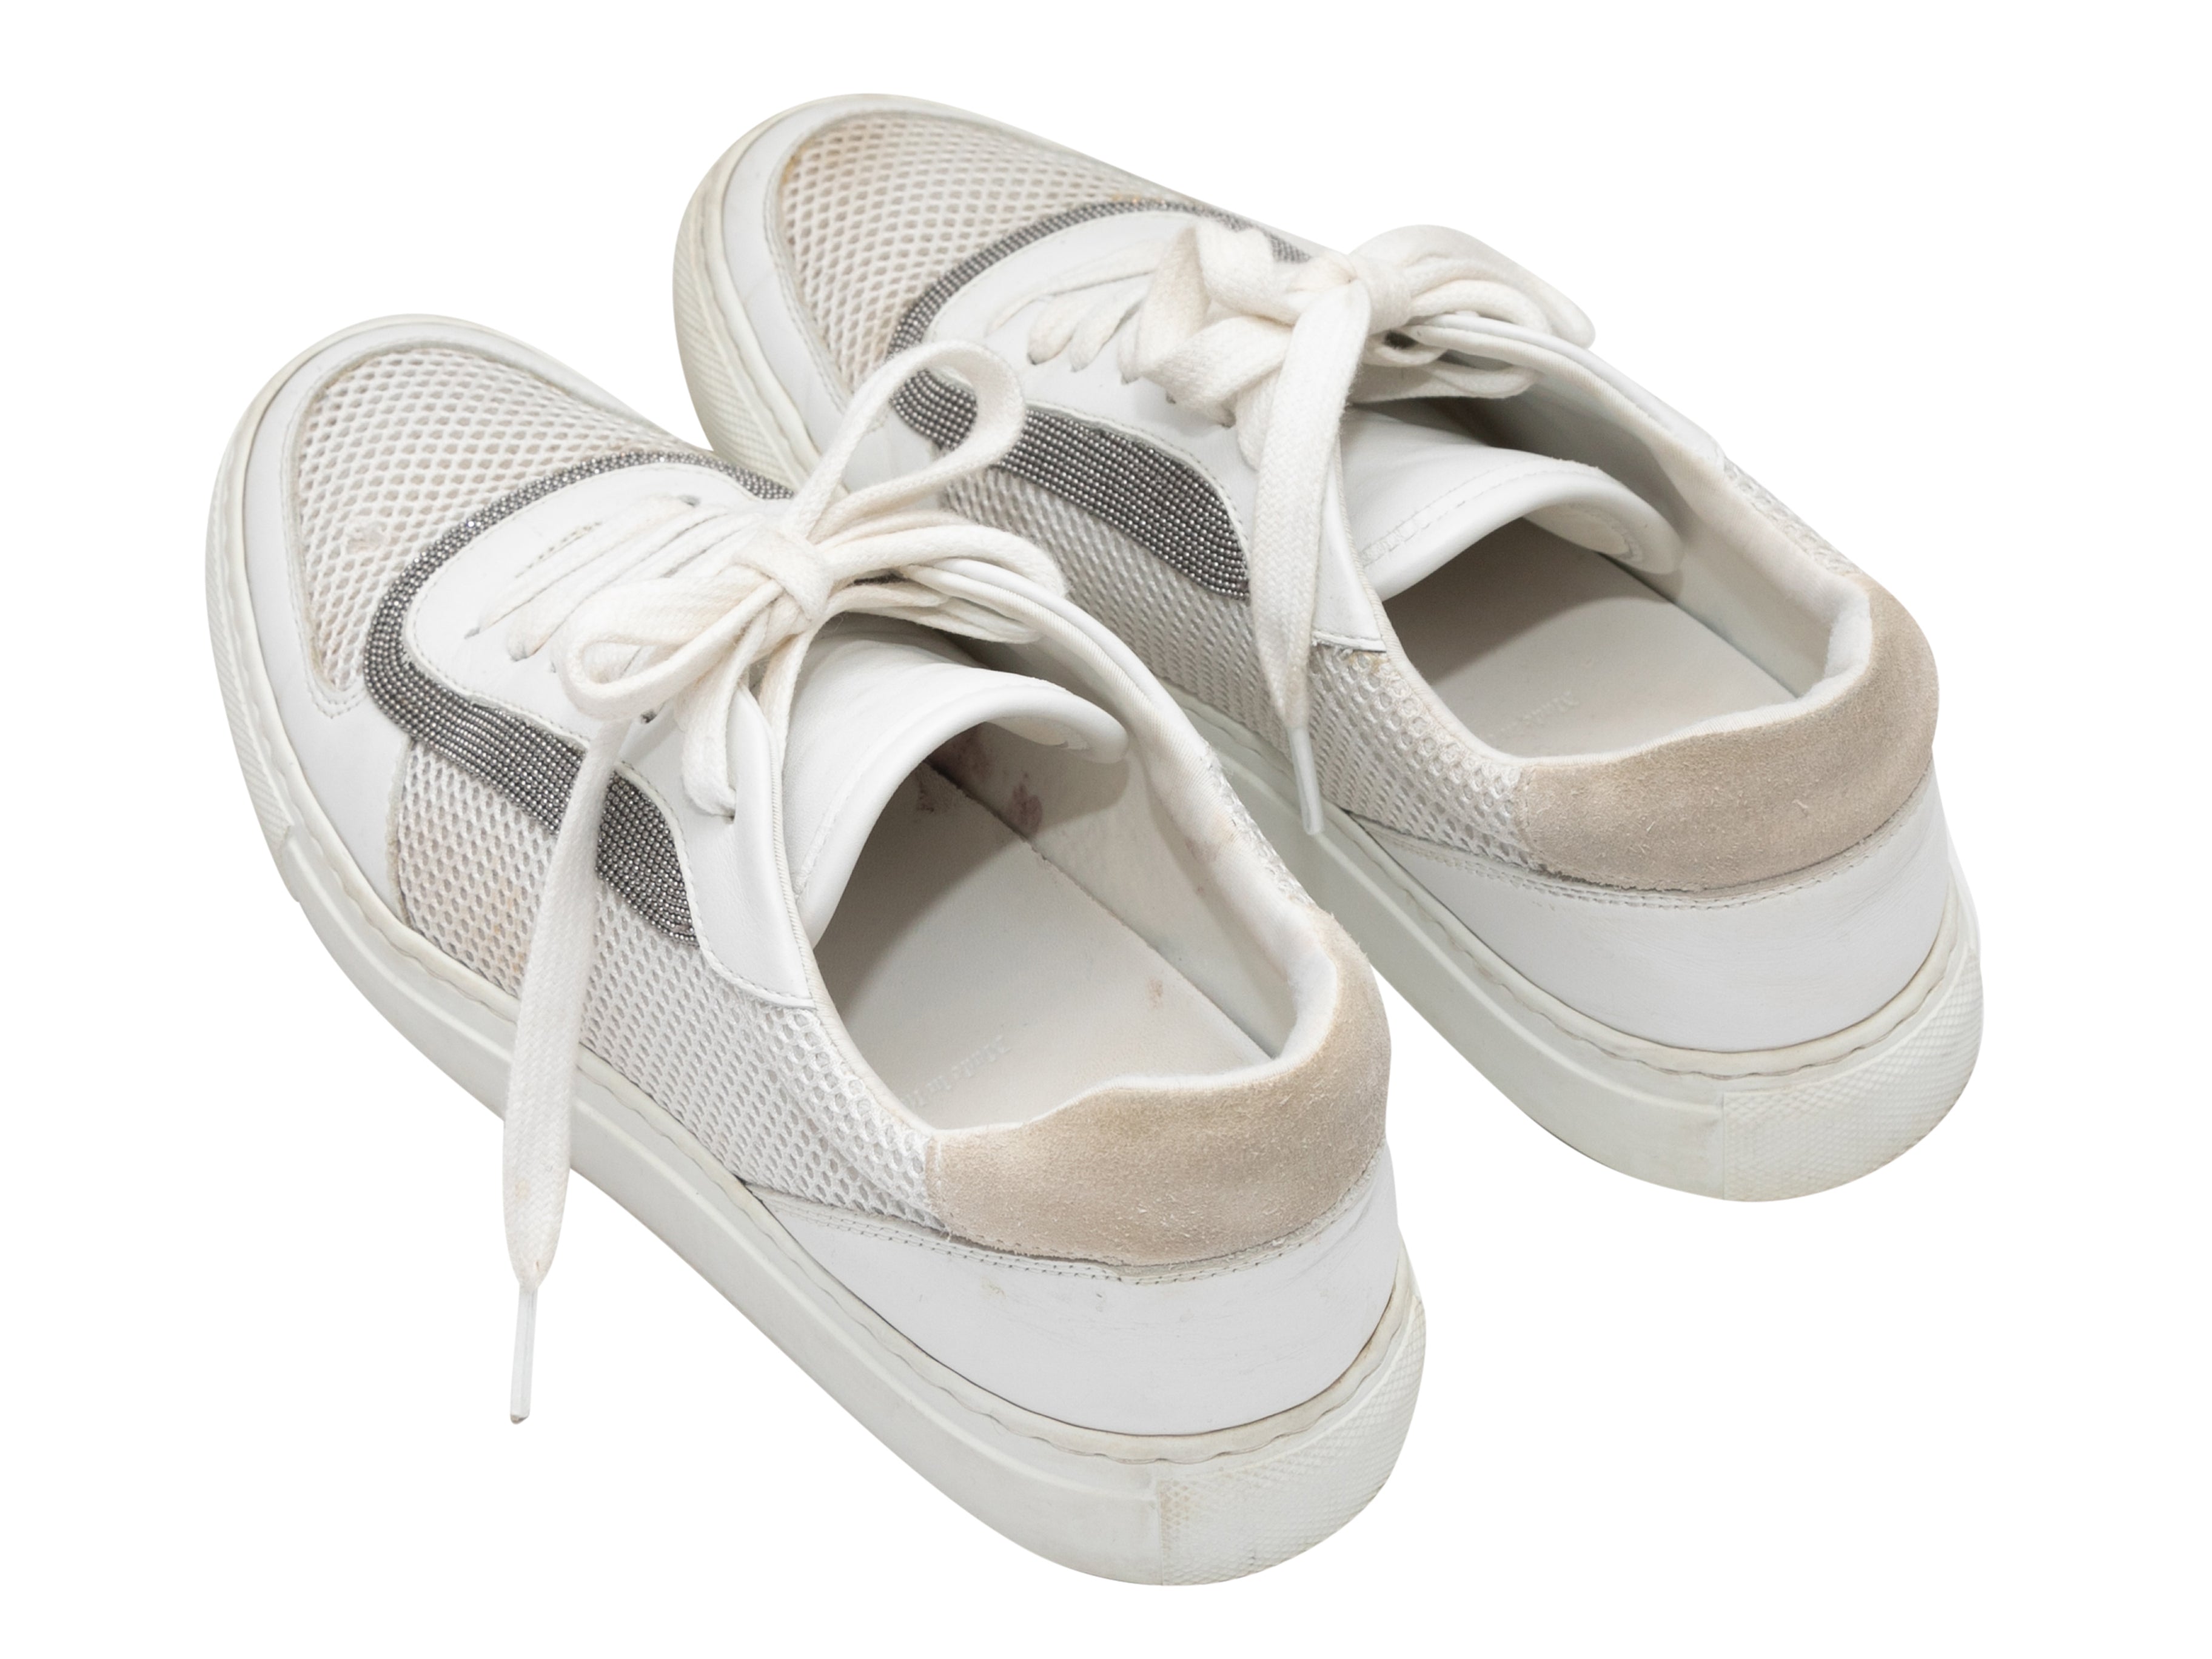 Monilli-Trimmed Sneakers Size 37